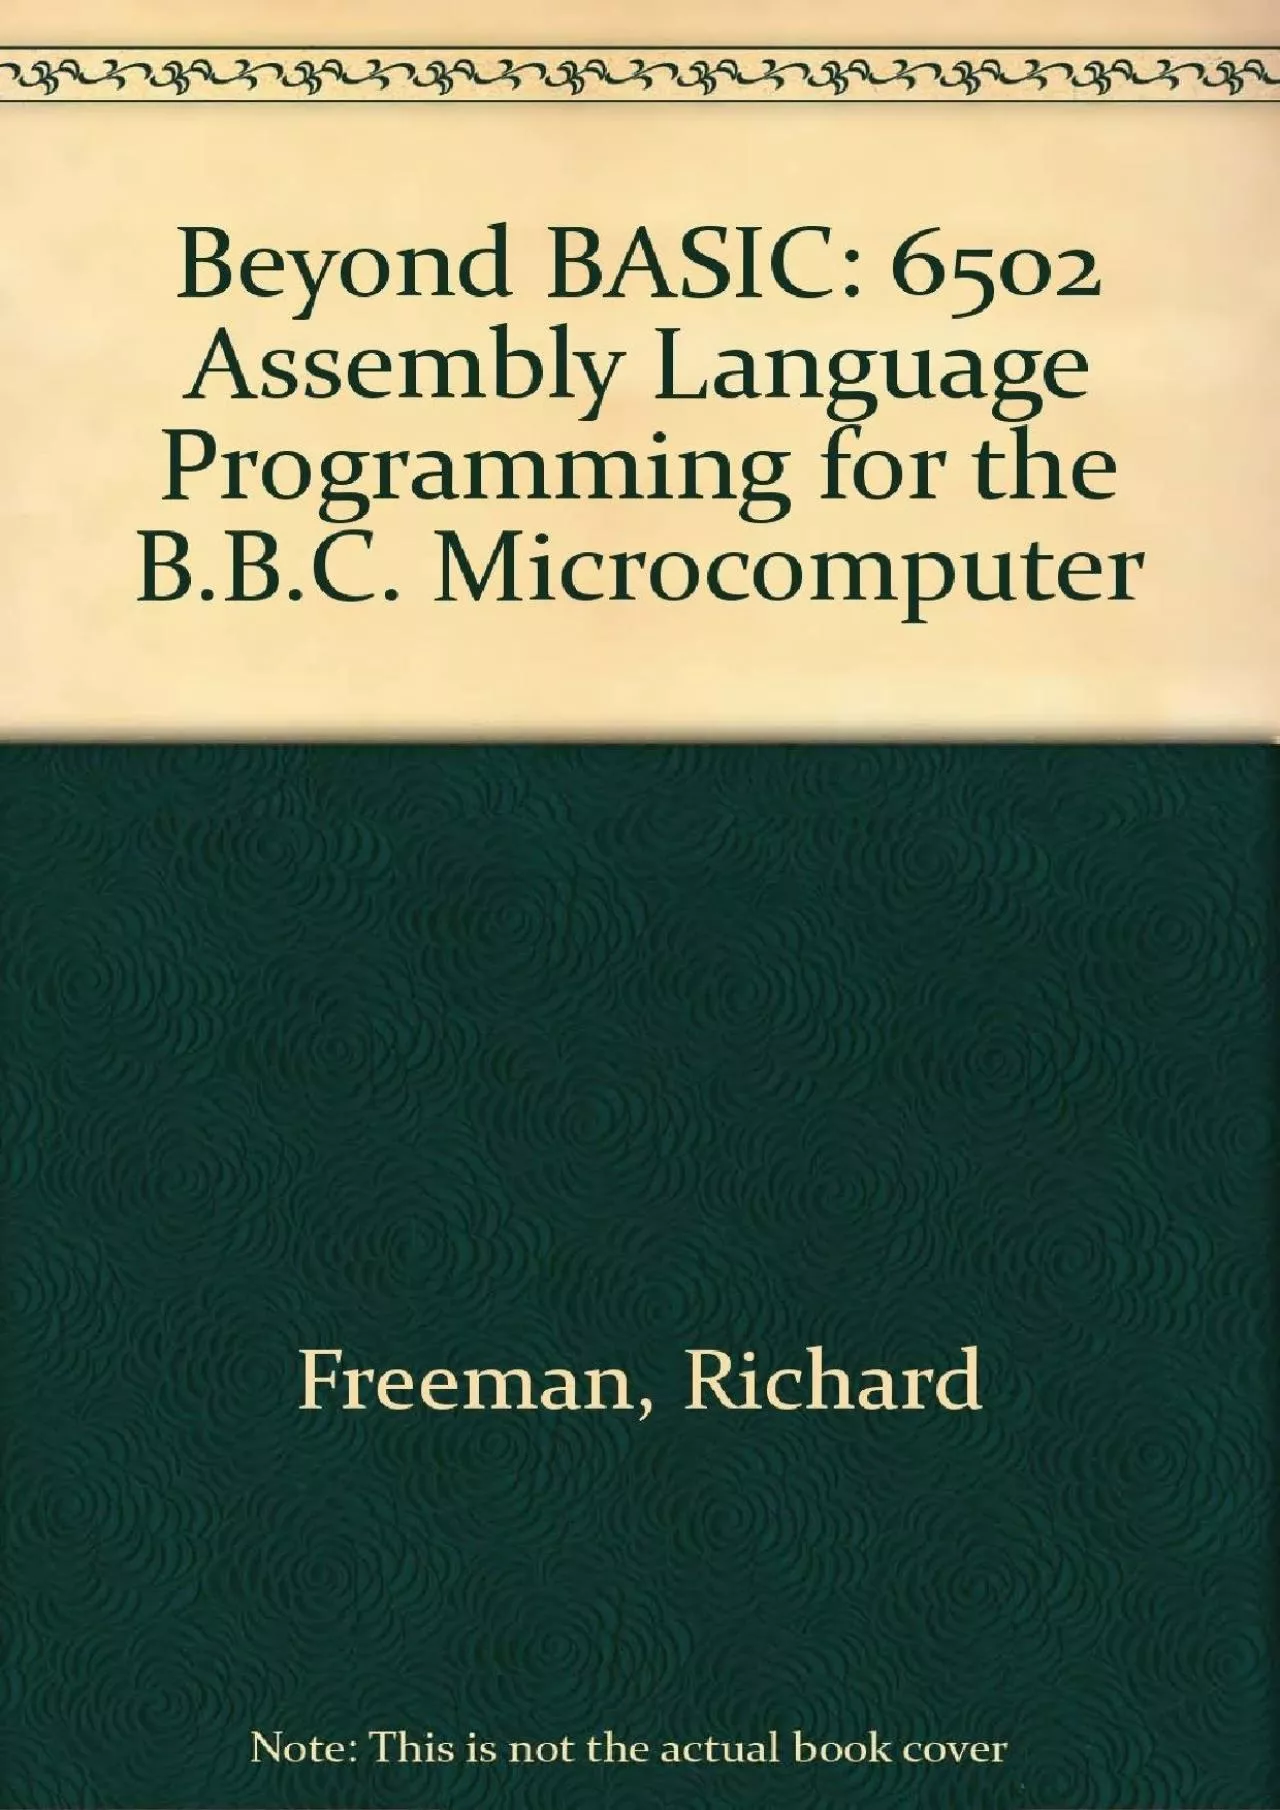 [eBOOK]-Beyond BASIC: 6502 Assembly Language Programming for the B.B.C. Microcomputer